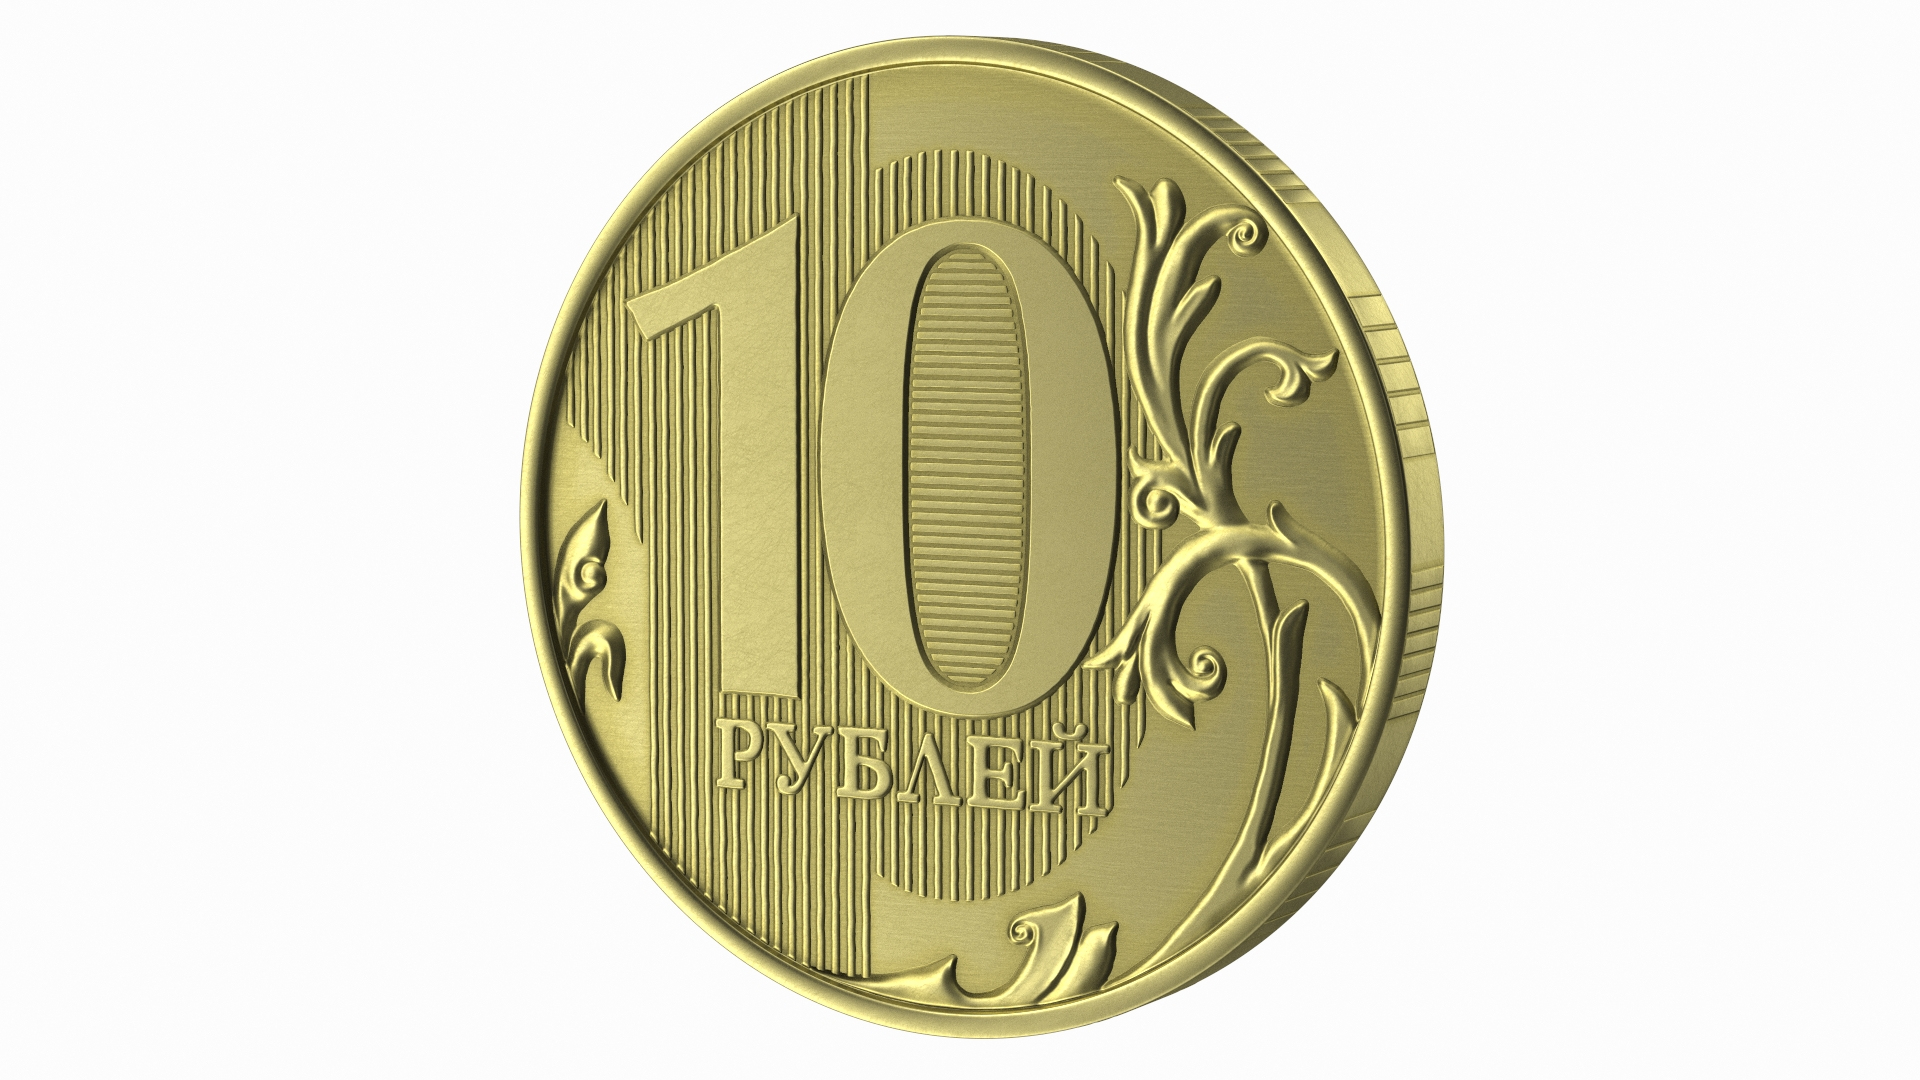 Russian Ruble Coins Collection 3 3D model https://p.turbosquid.com/ts-thumb/l4/g7CpGF/Y1/russian_10_rubles_coin_360/jpg/1666774981/1920x1080/turn_fit_q99/f53c9de97d85687200417837c20b7fd24d8409fa/russian_10_rubles_coin_360-1.jpg